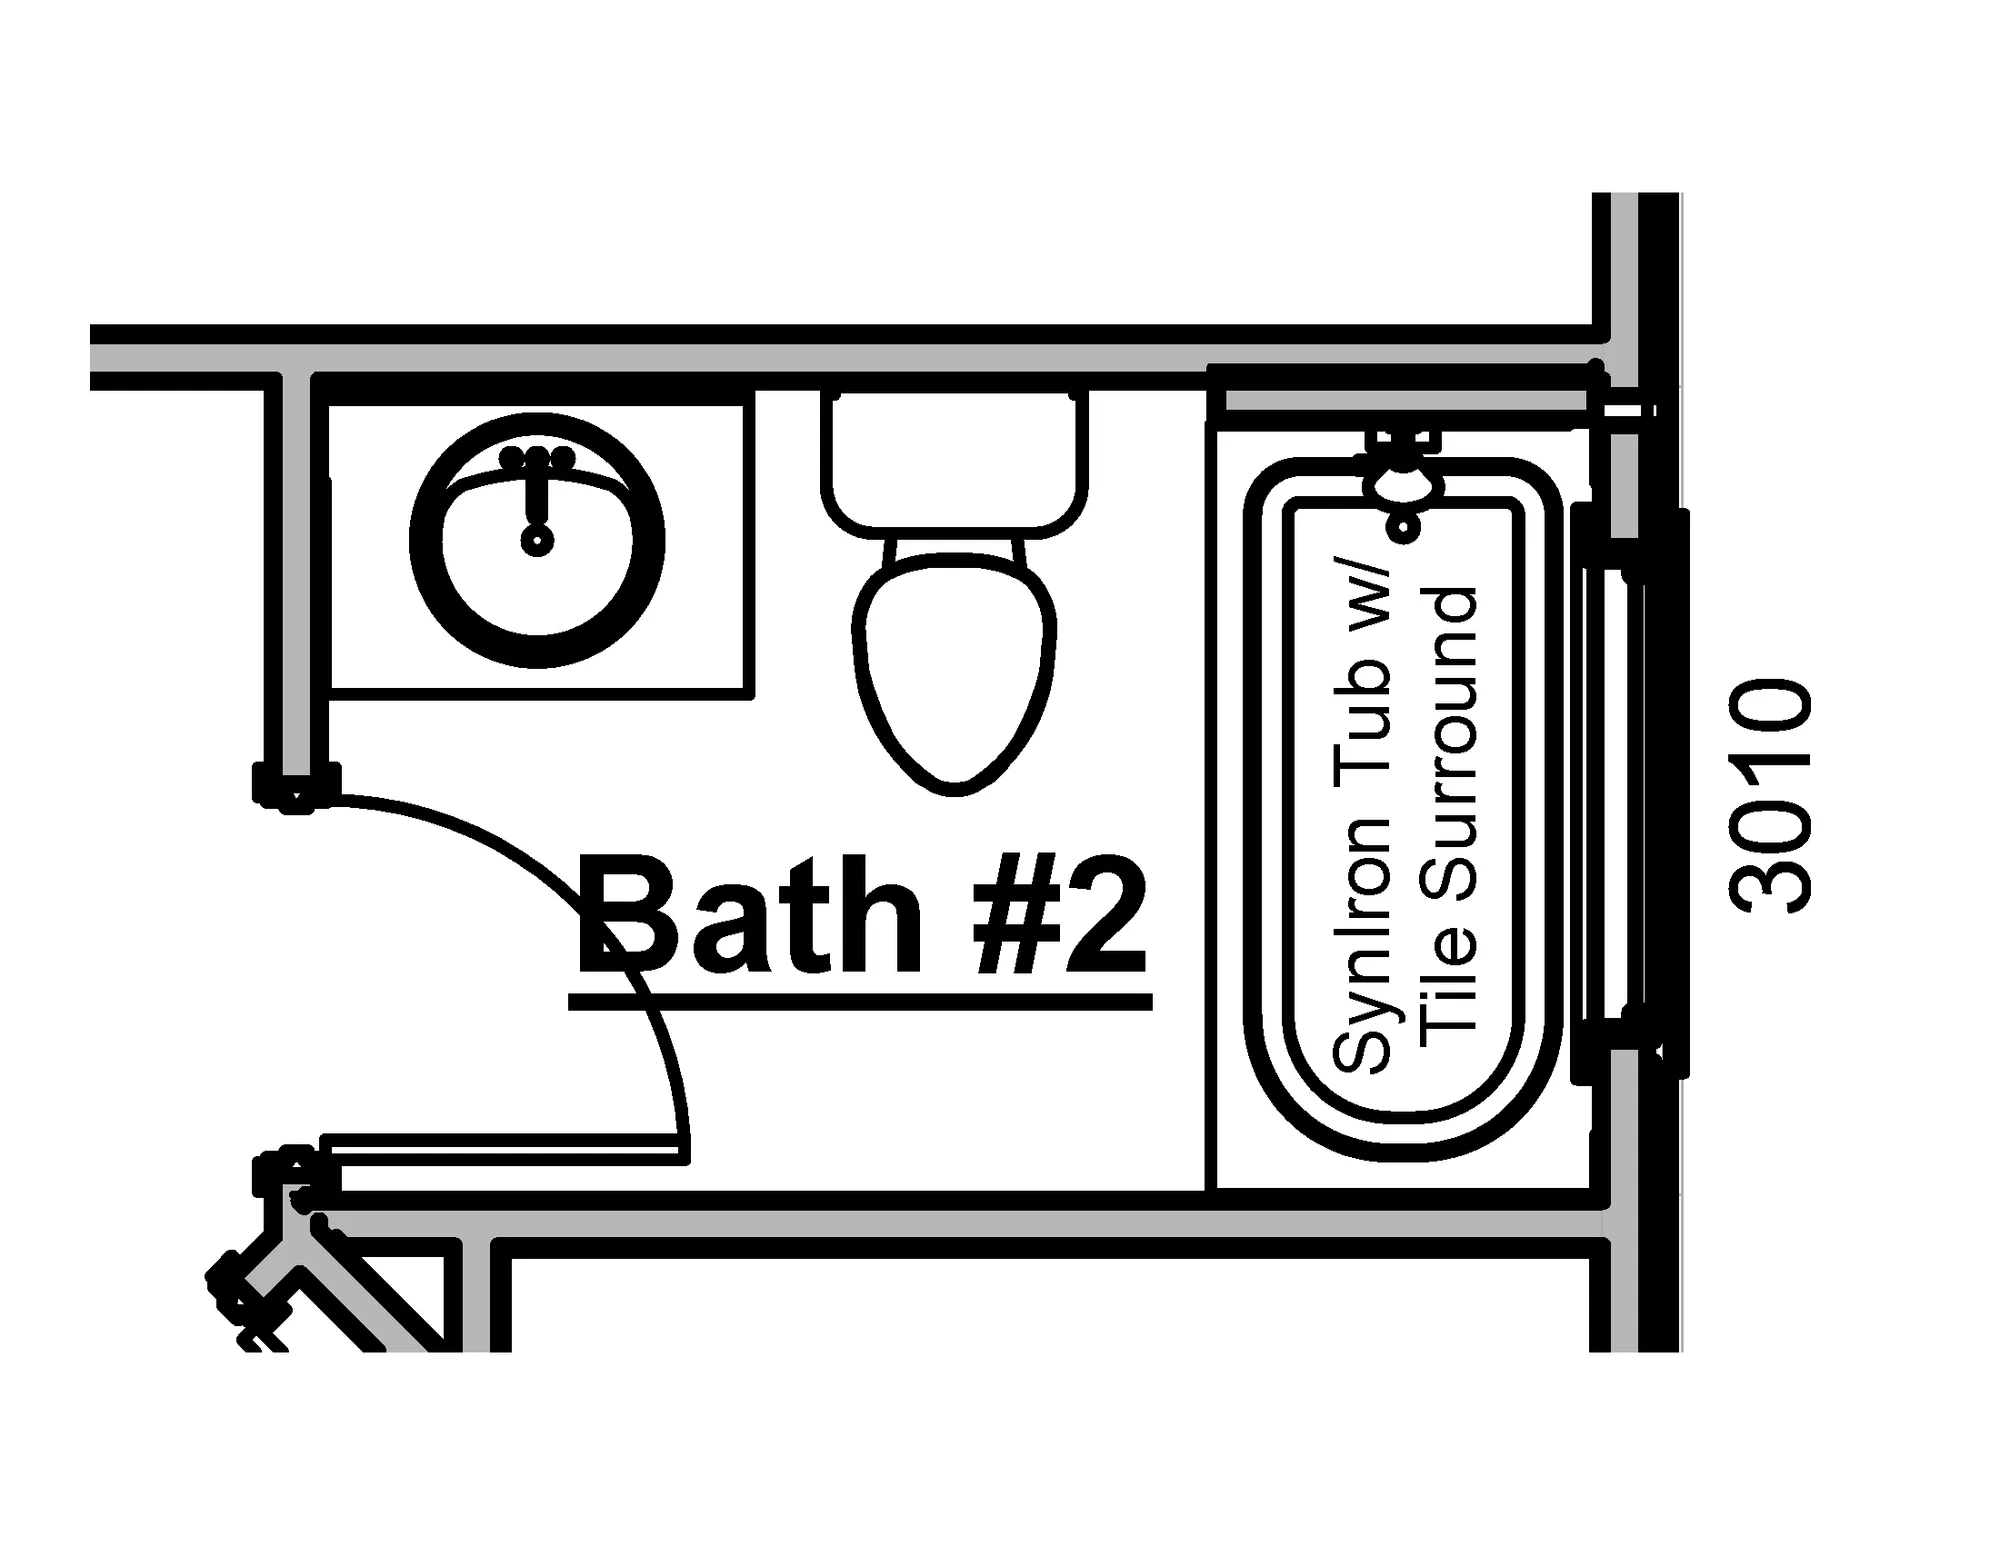 Bath #2 Tub Shower Combo with Tile Surround and Transom Window Option - undefined